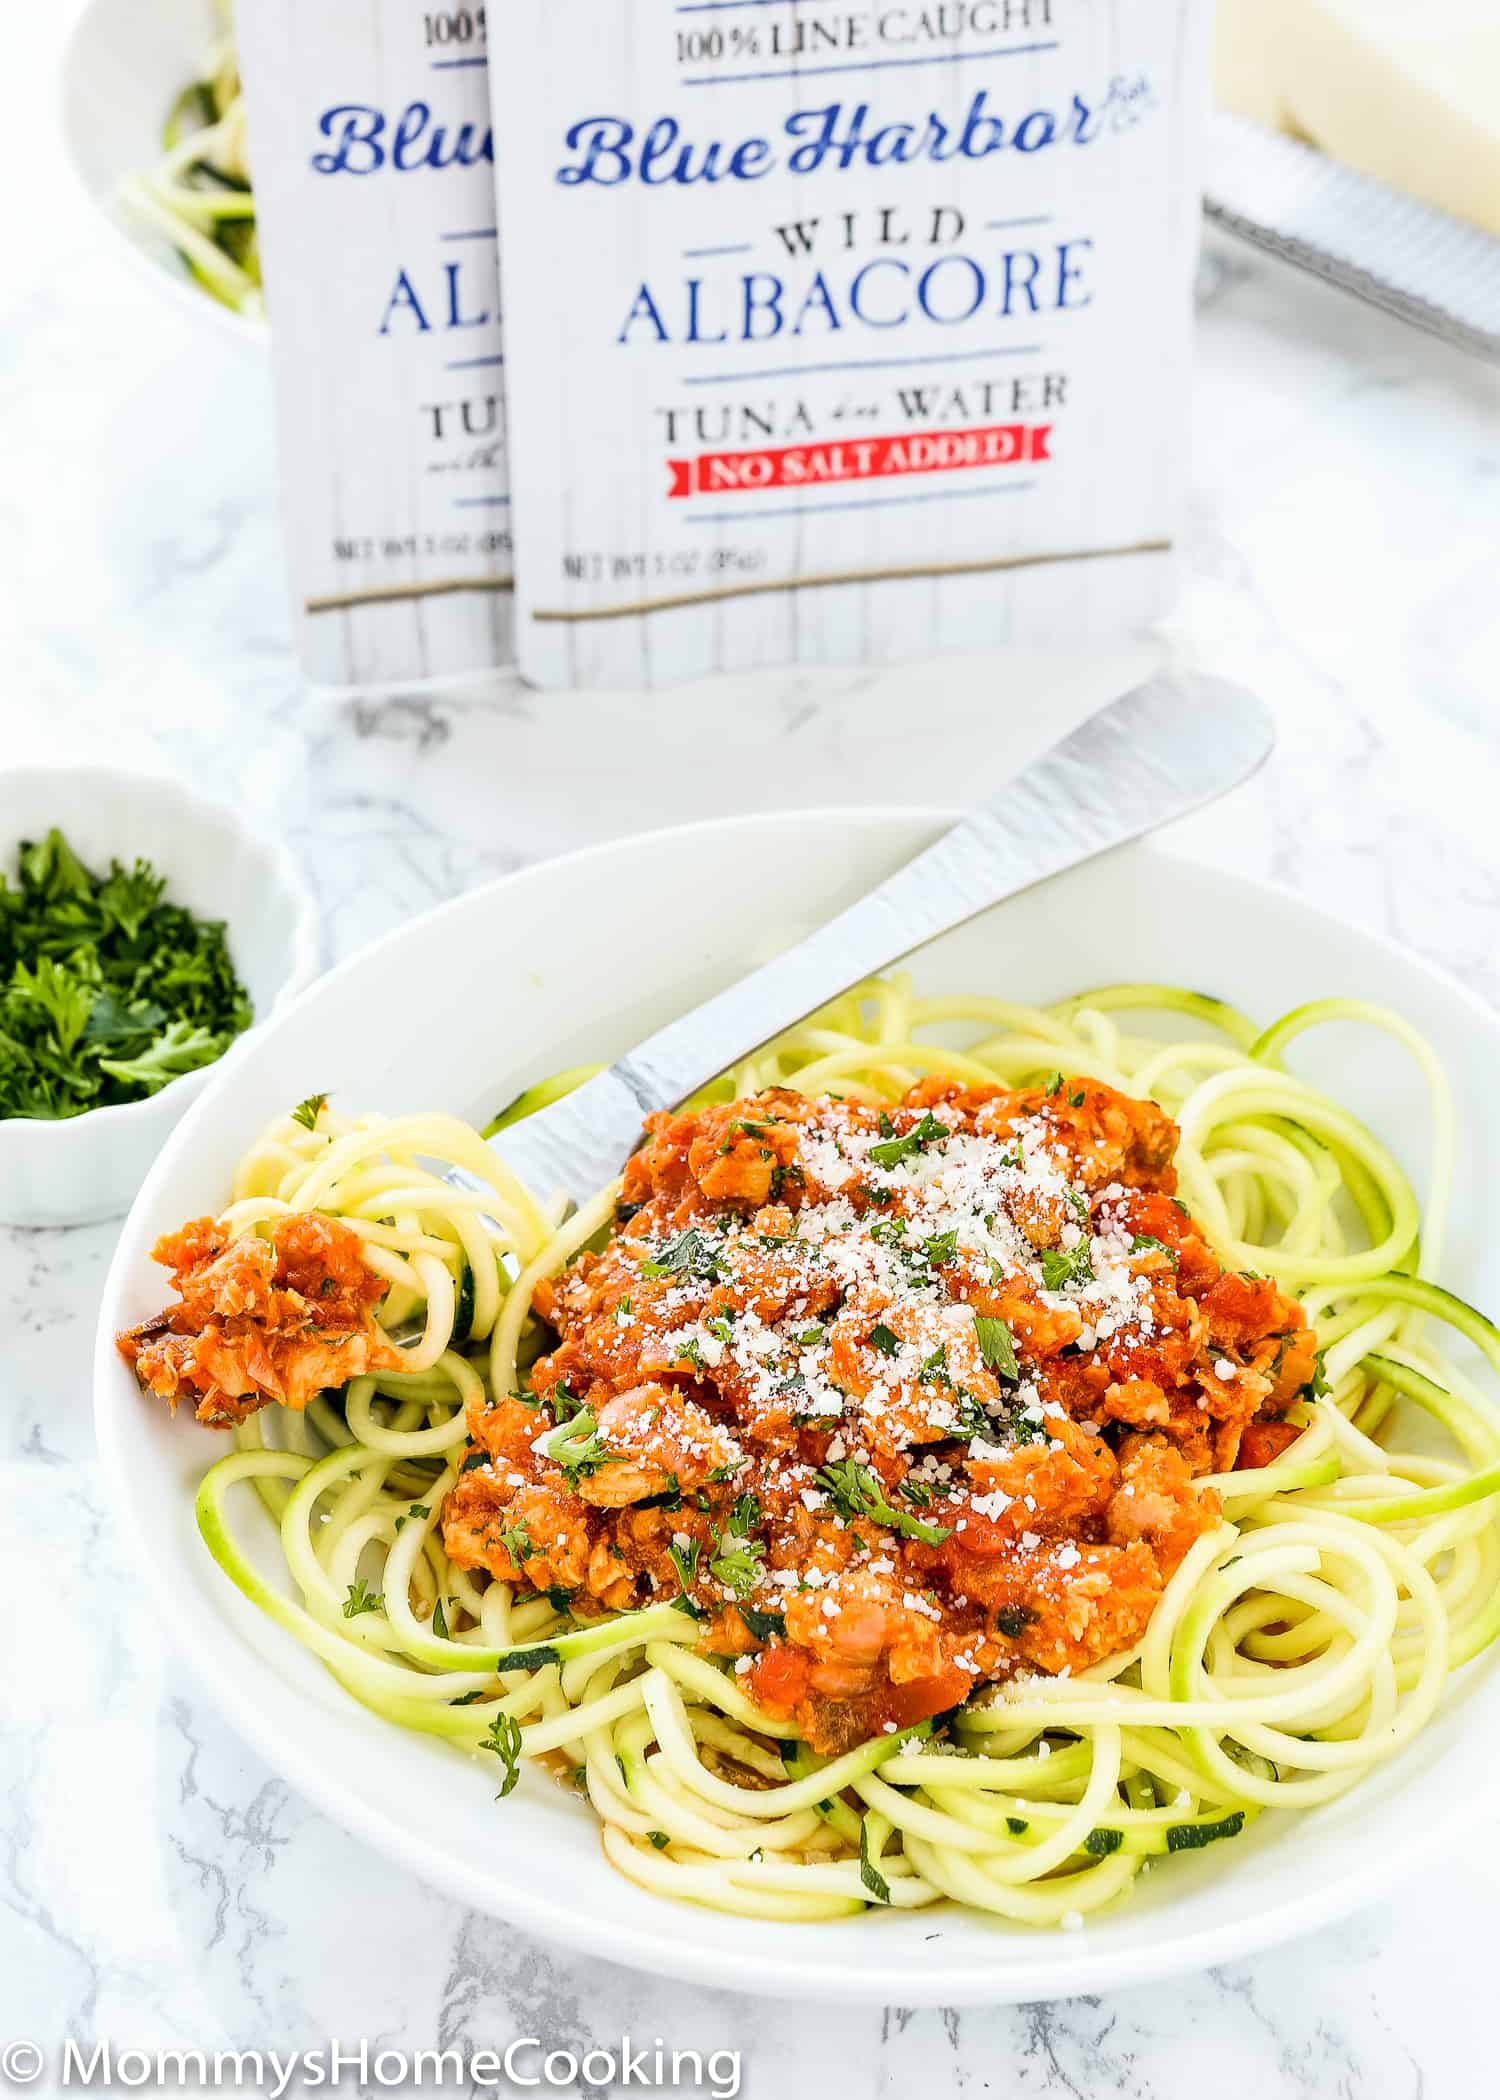 This Easy Tuna Ragu recipe is delicious, light and healthy yet full of robust flavors. It’s ridiculously easy to make and everything is cooked in one pan in less than 30 minutes. [Keto Friendly] [Whole 30 Friendly] https://mommyshomecooking.com